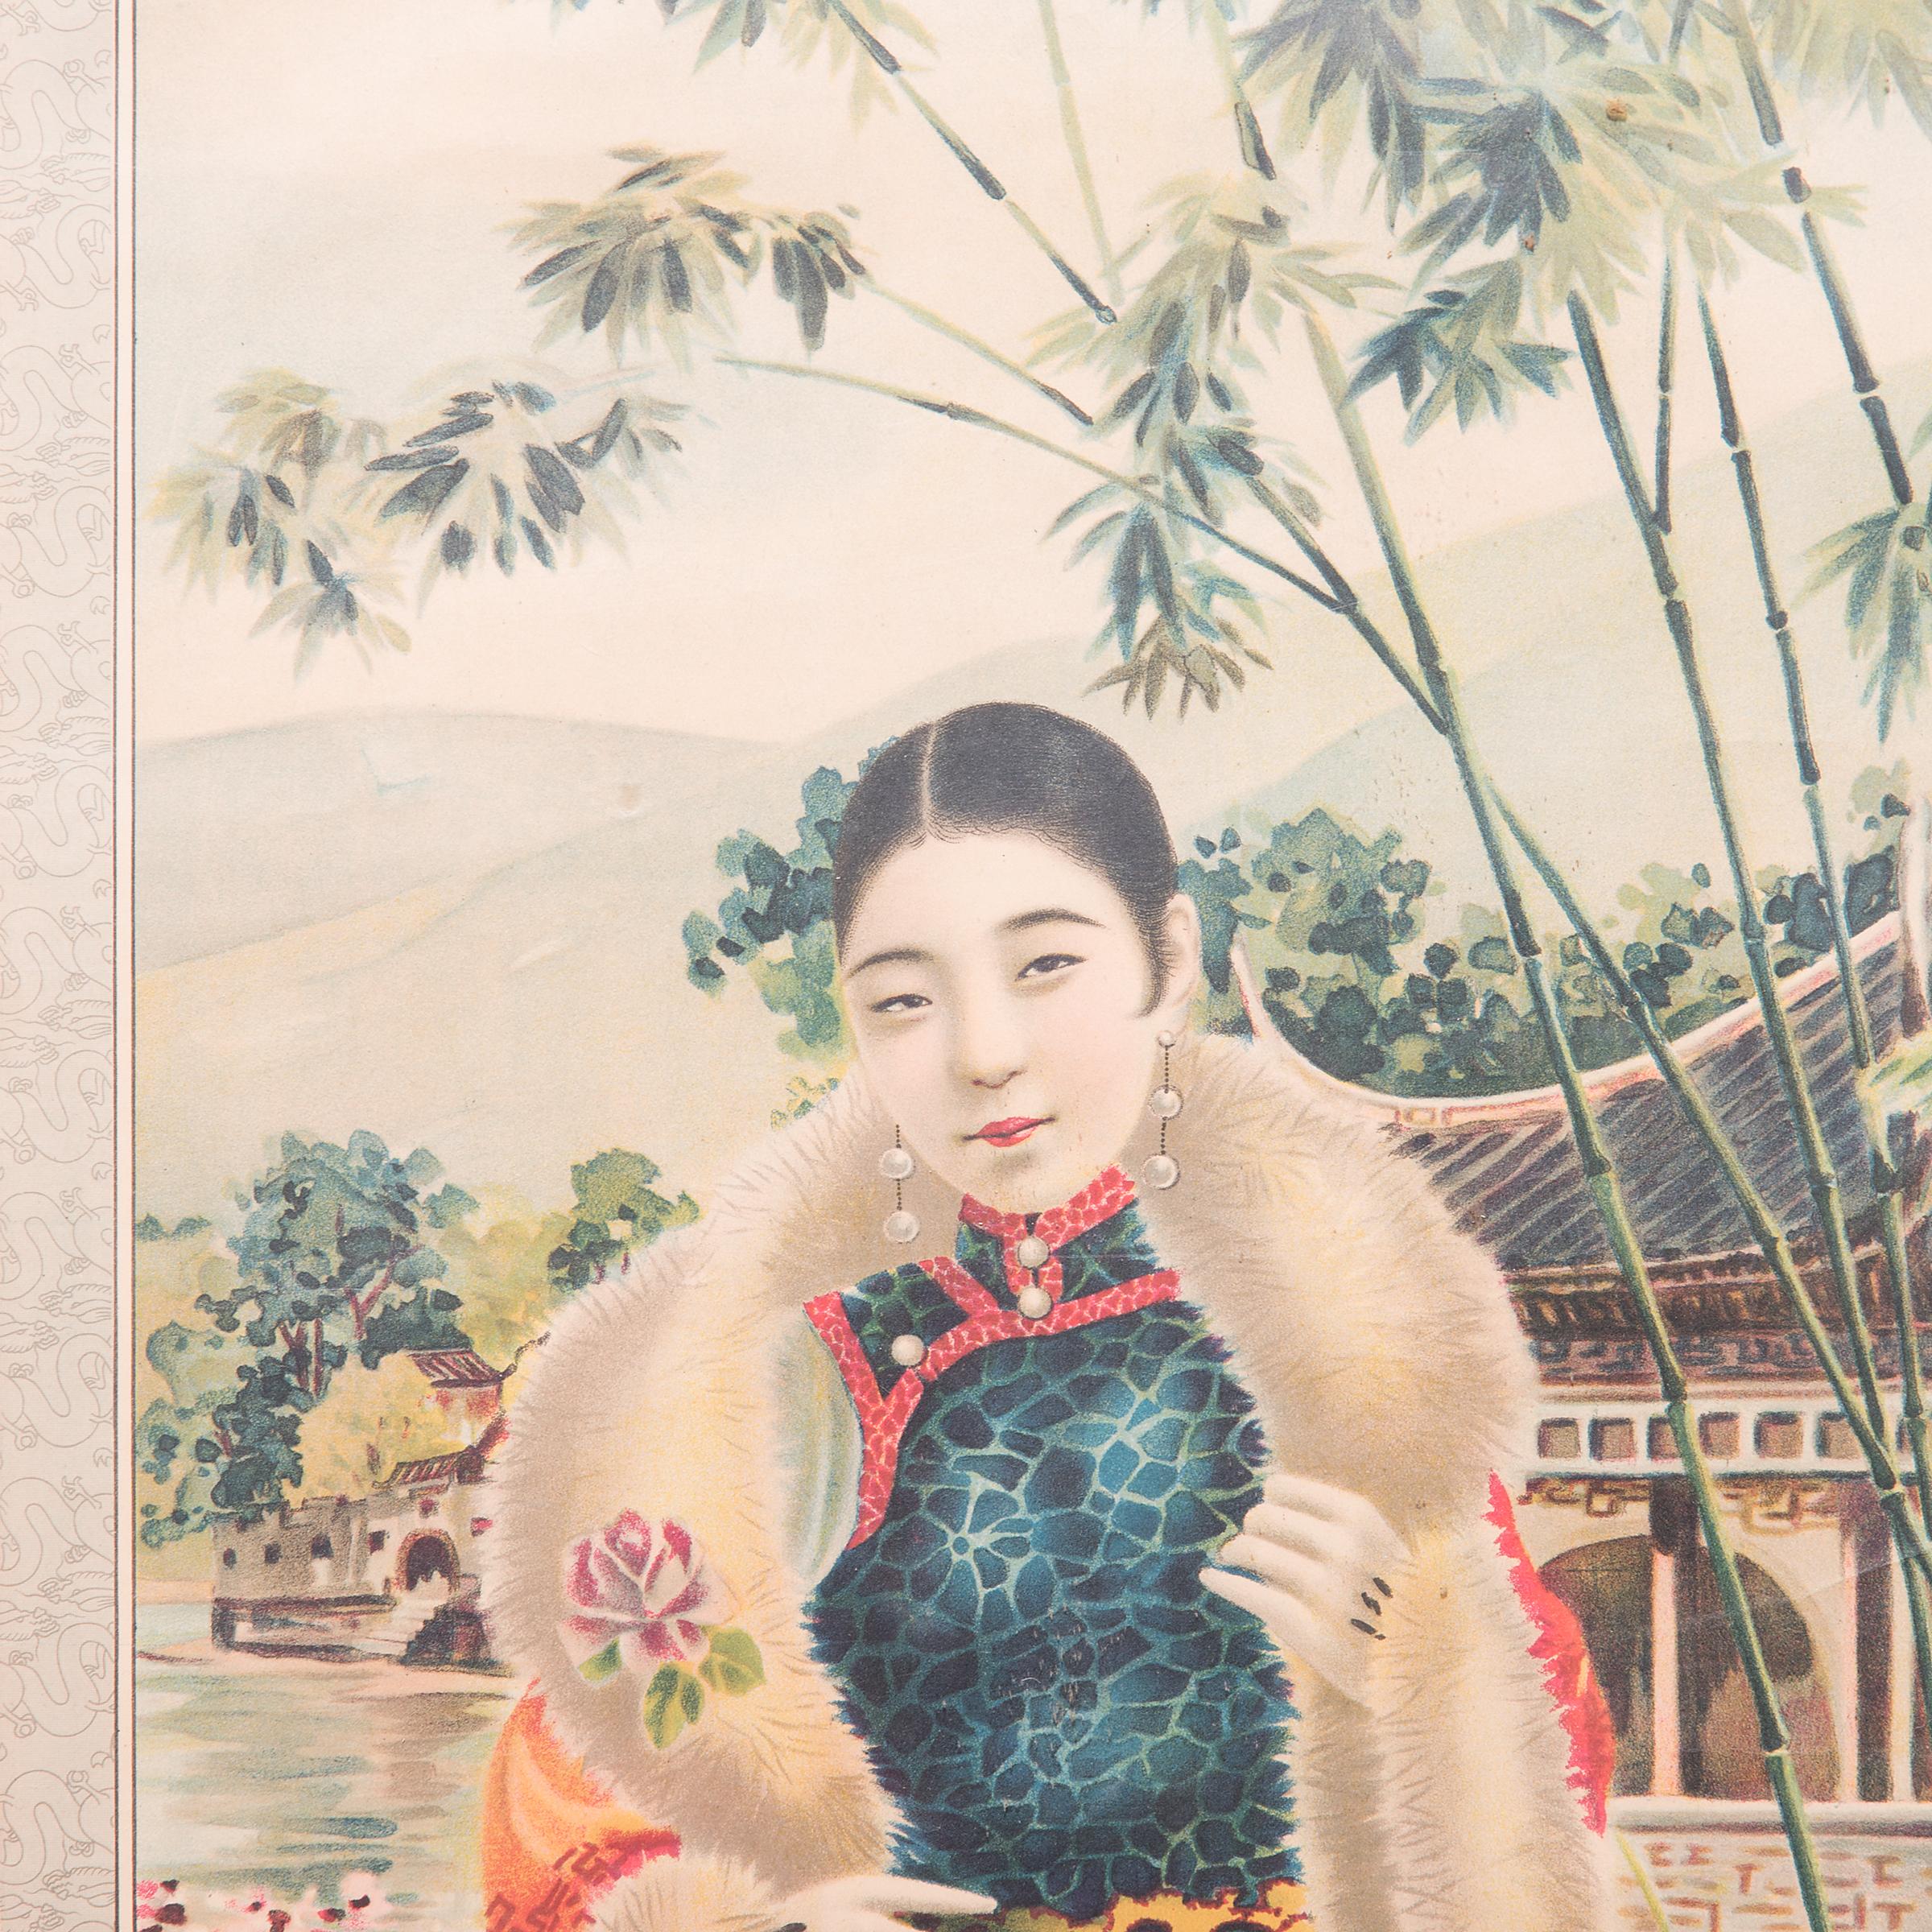 Mixing Western and traditional pictorial styles, this vintage poster depicts a fashionable young woman strolling through a formal garden. The woman pauses to face the viewer, showing off the Western-style fur coat that cloaks her traditional garb.